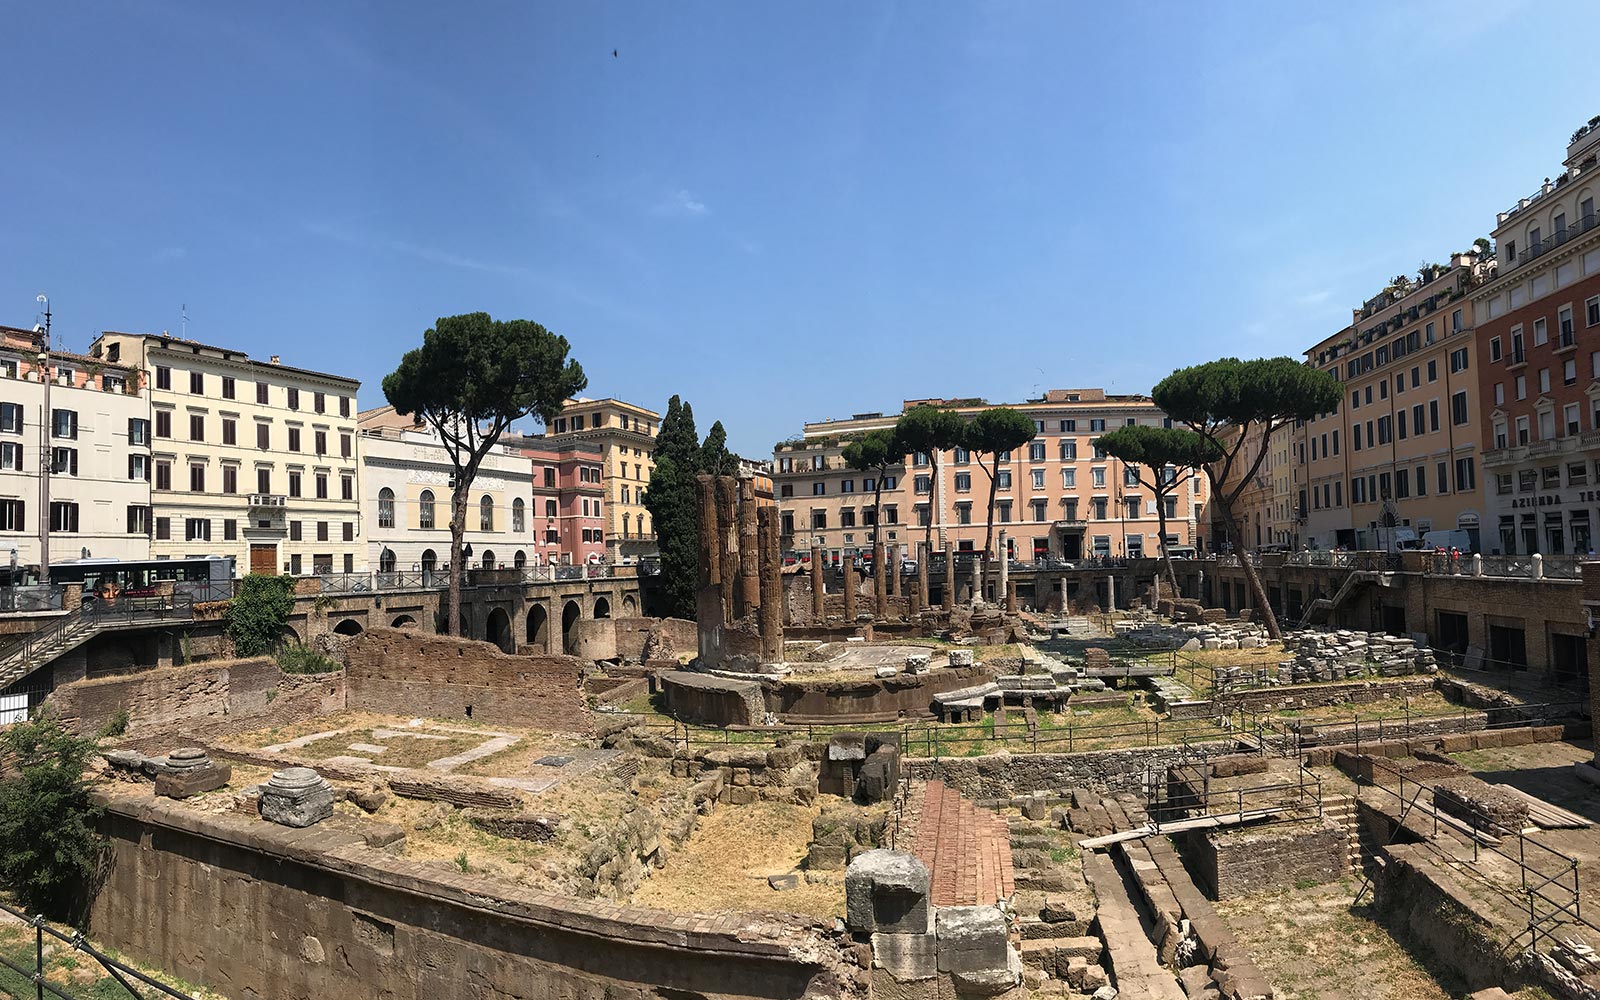 Ruins of Largo di Torre Argentina in Rome, Italy. The Colosseum & Rome, the last wonder